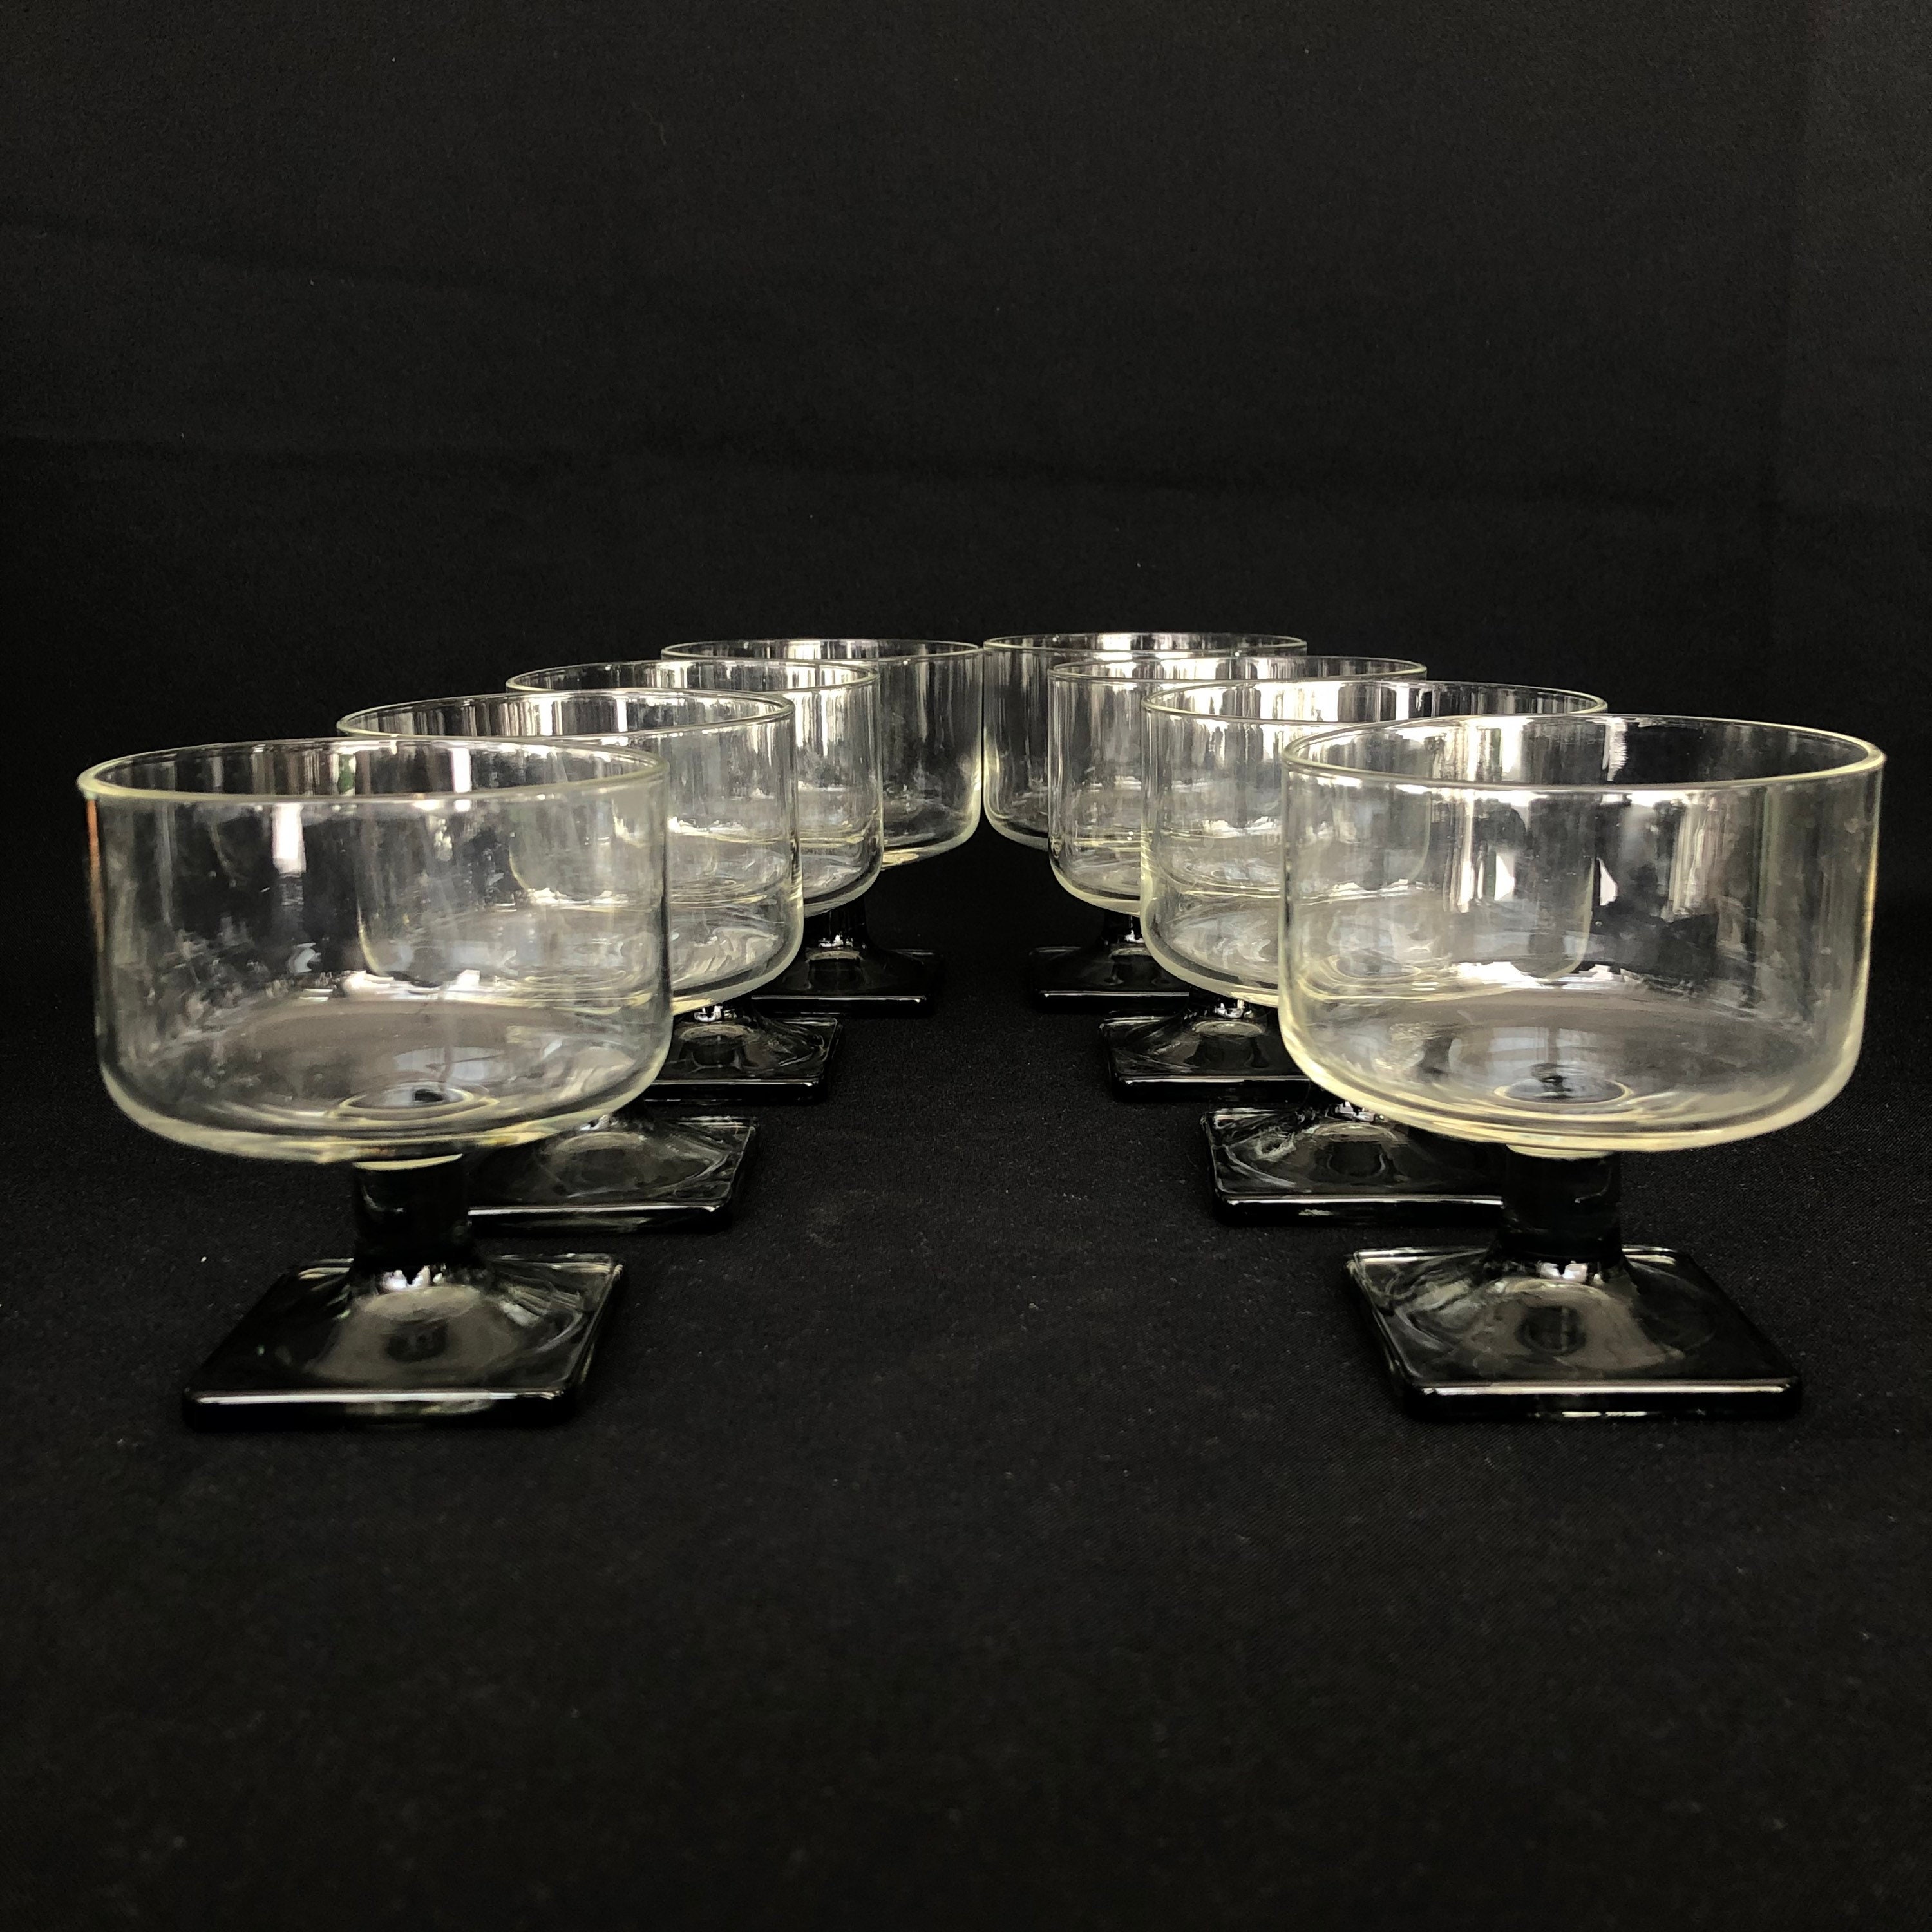 Heavy Base Drinking Glasses, Square Base Round Top Glass Cups for